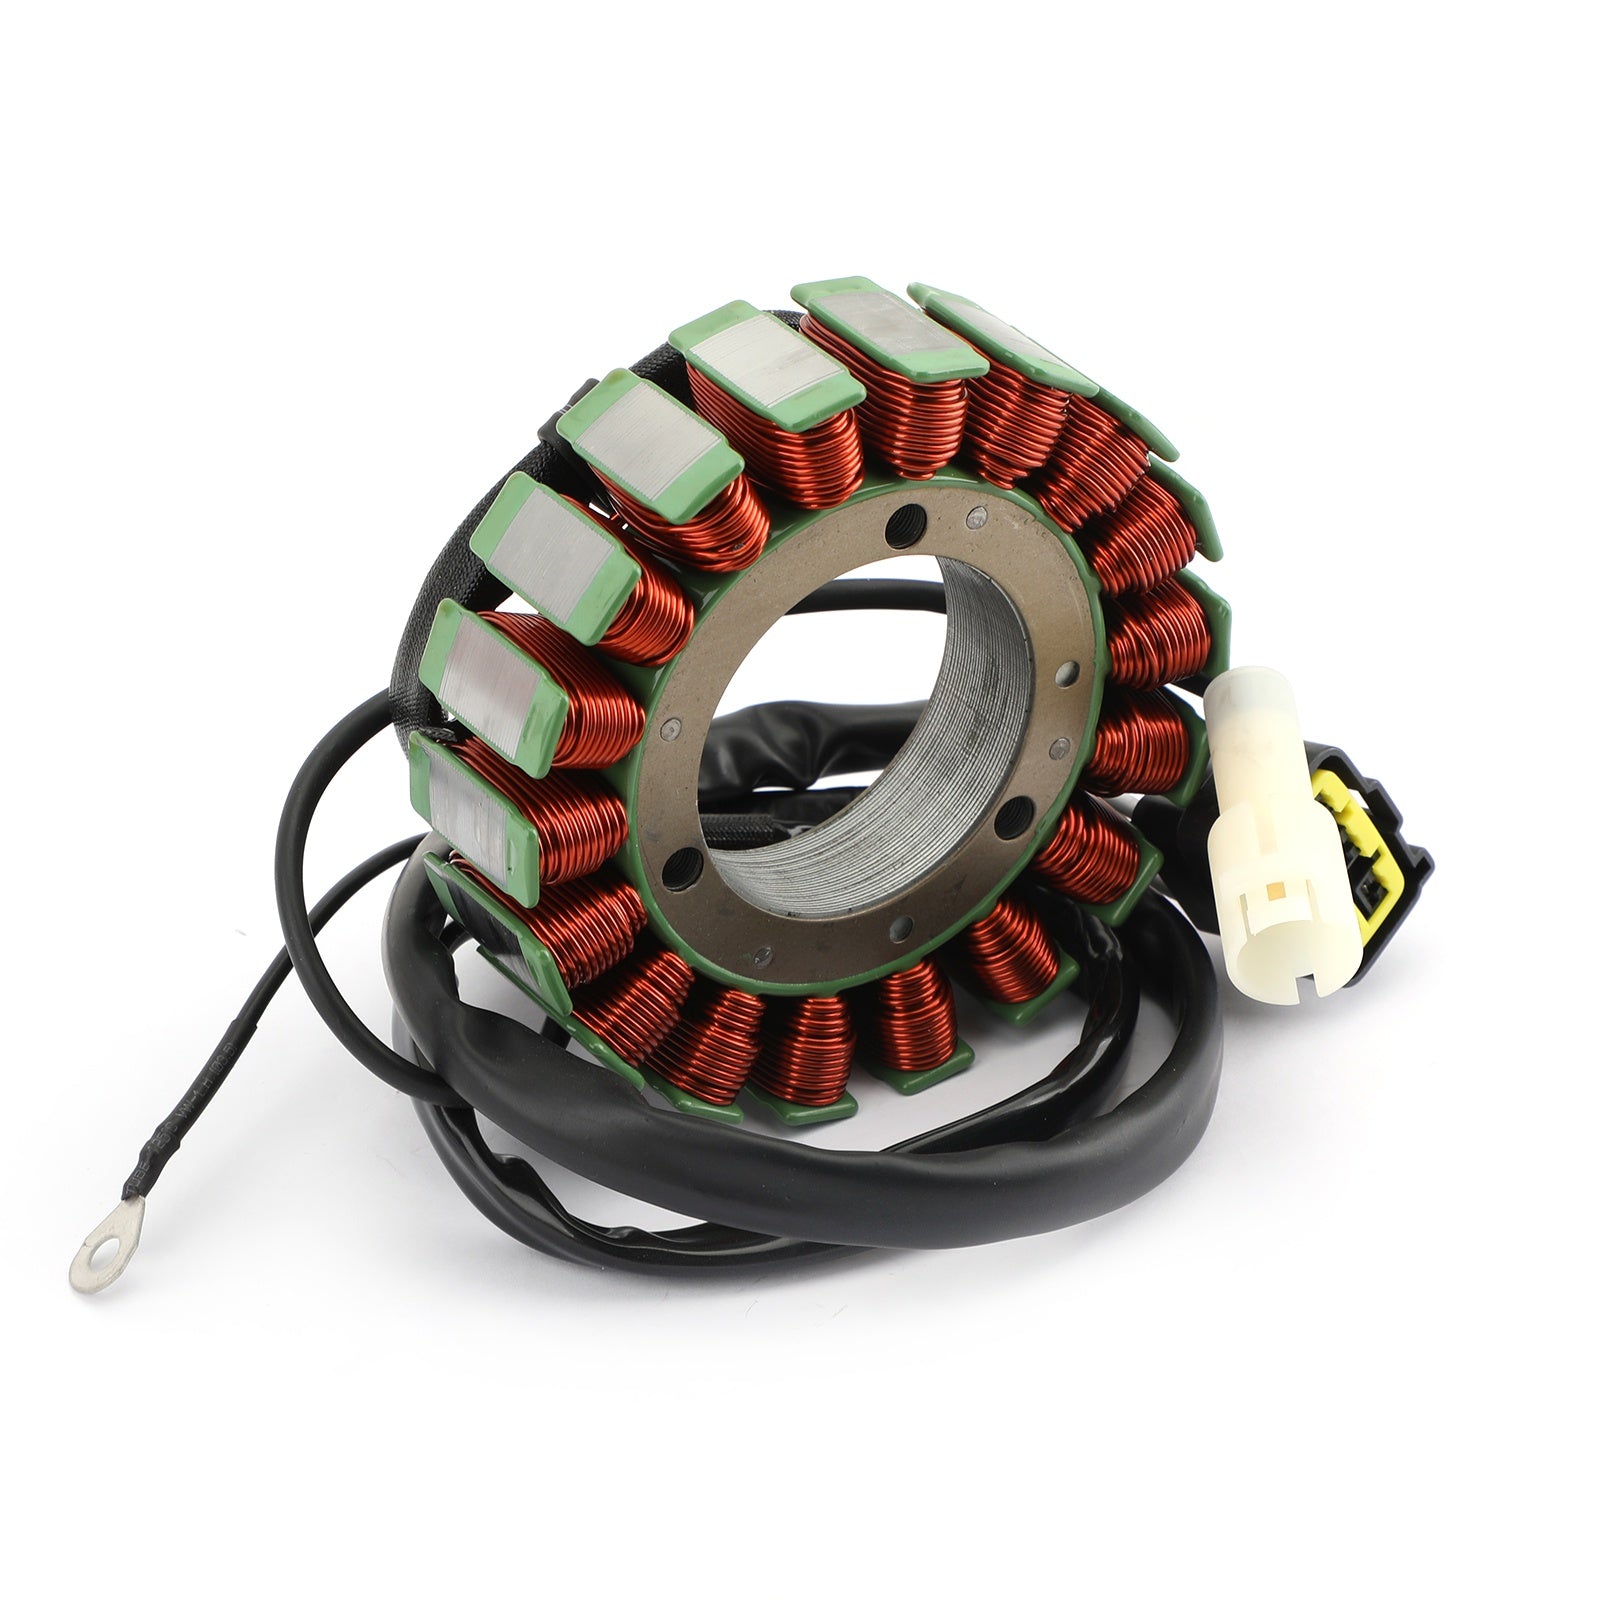 Magneto Generator Engine Stator Coil 6C5-81410-01 Fit For Yamaha FT60 FT50 F70 F60 F50 F40 2005-2017